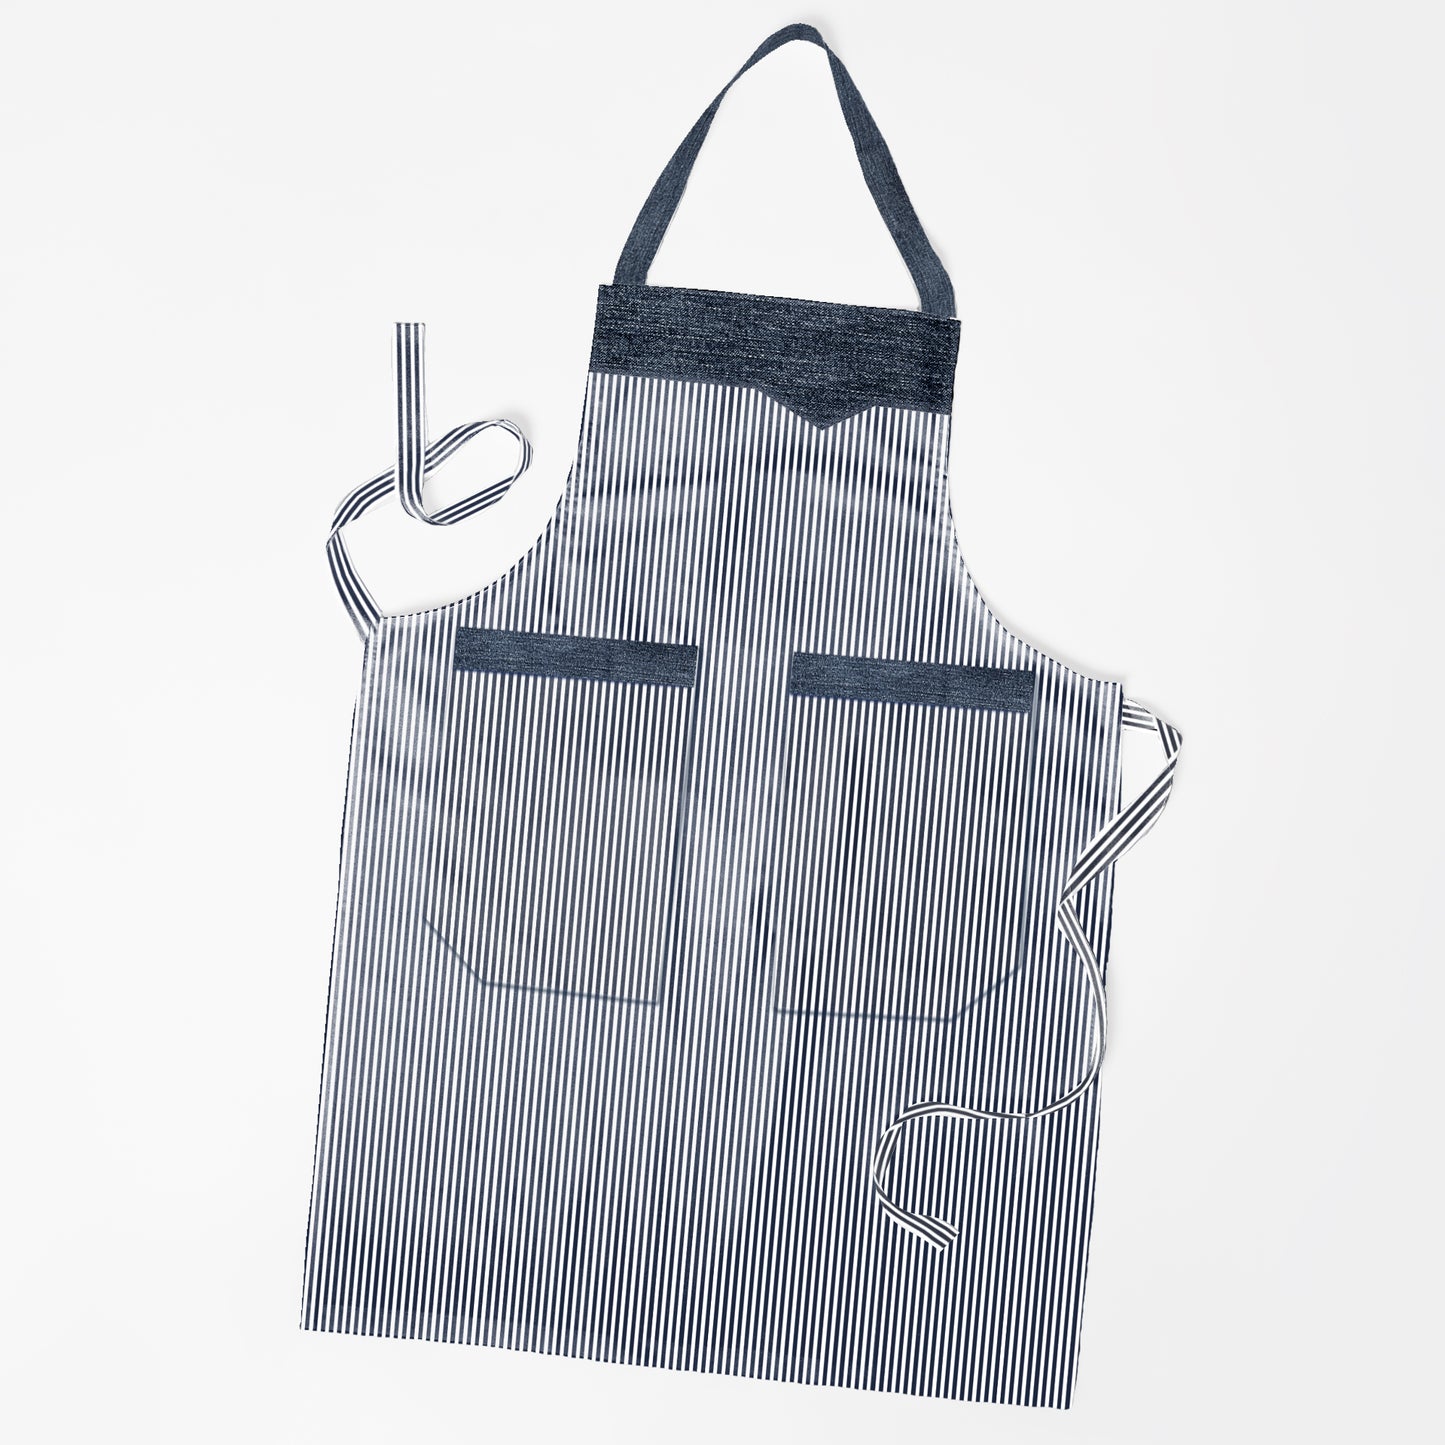 Chef Bib Apron Dress with Double Pocket for Professional Cooking~1204